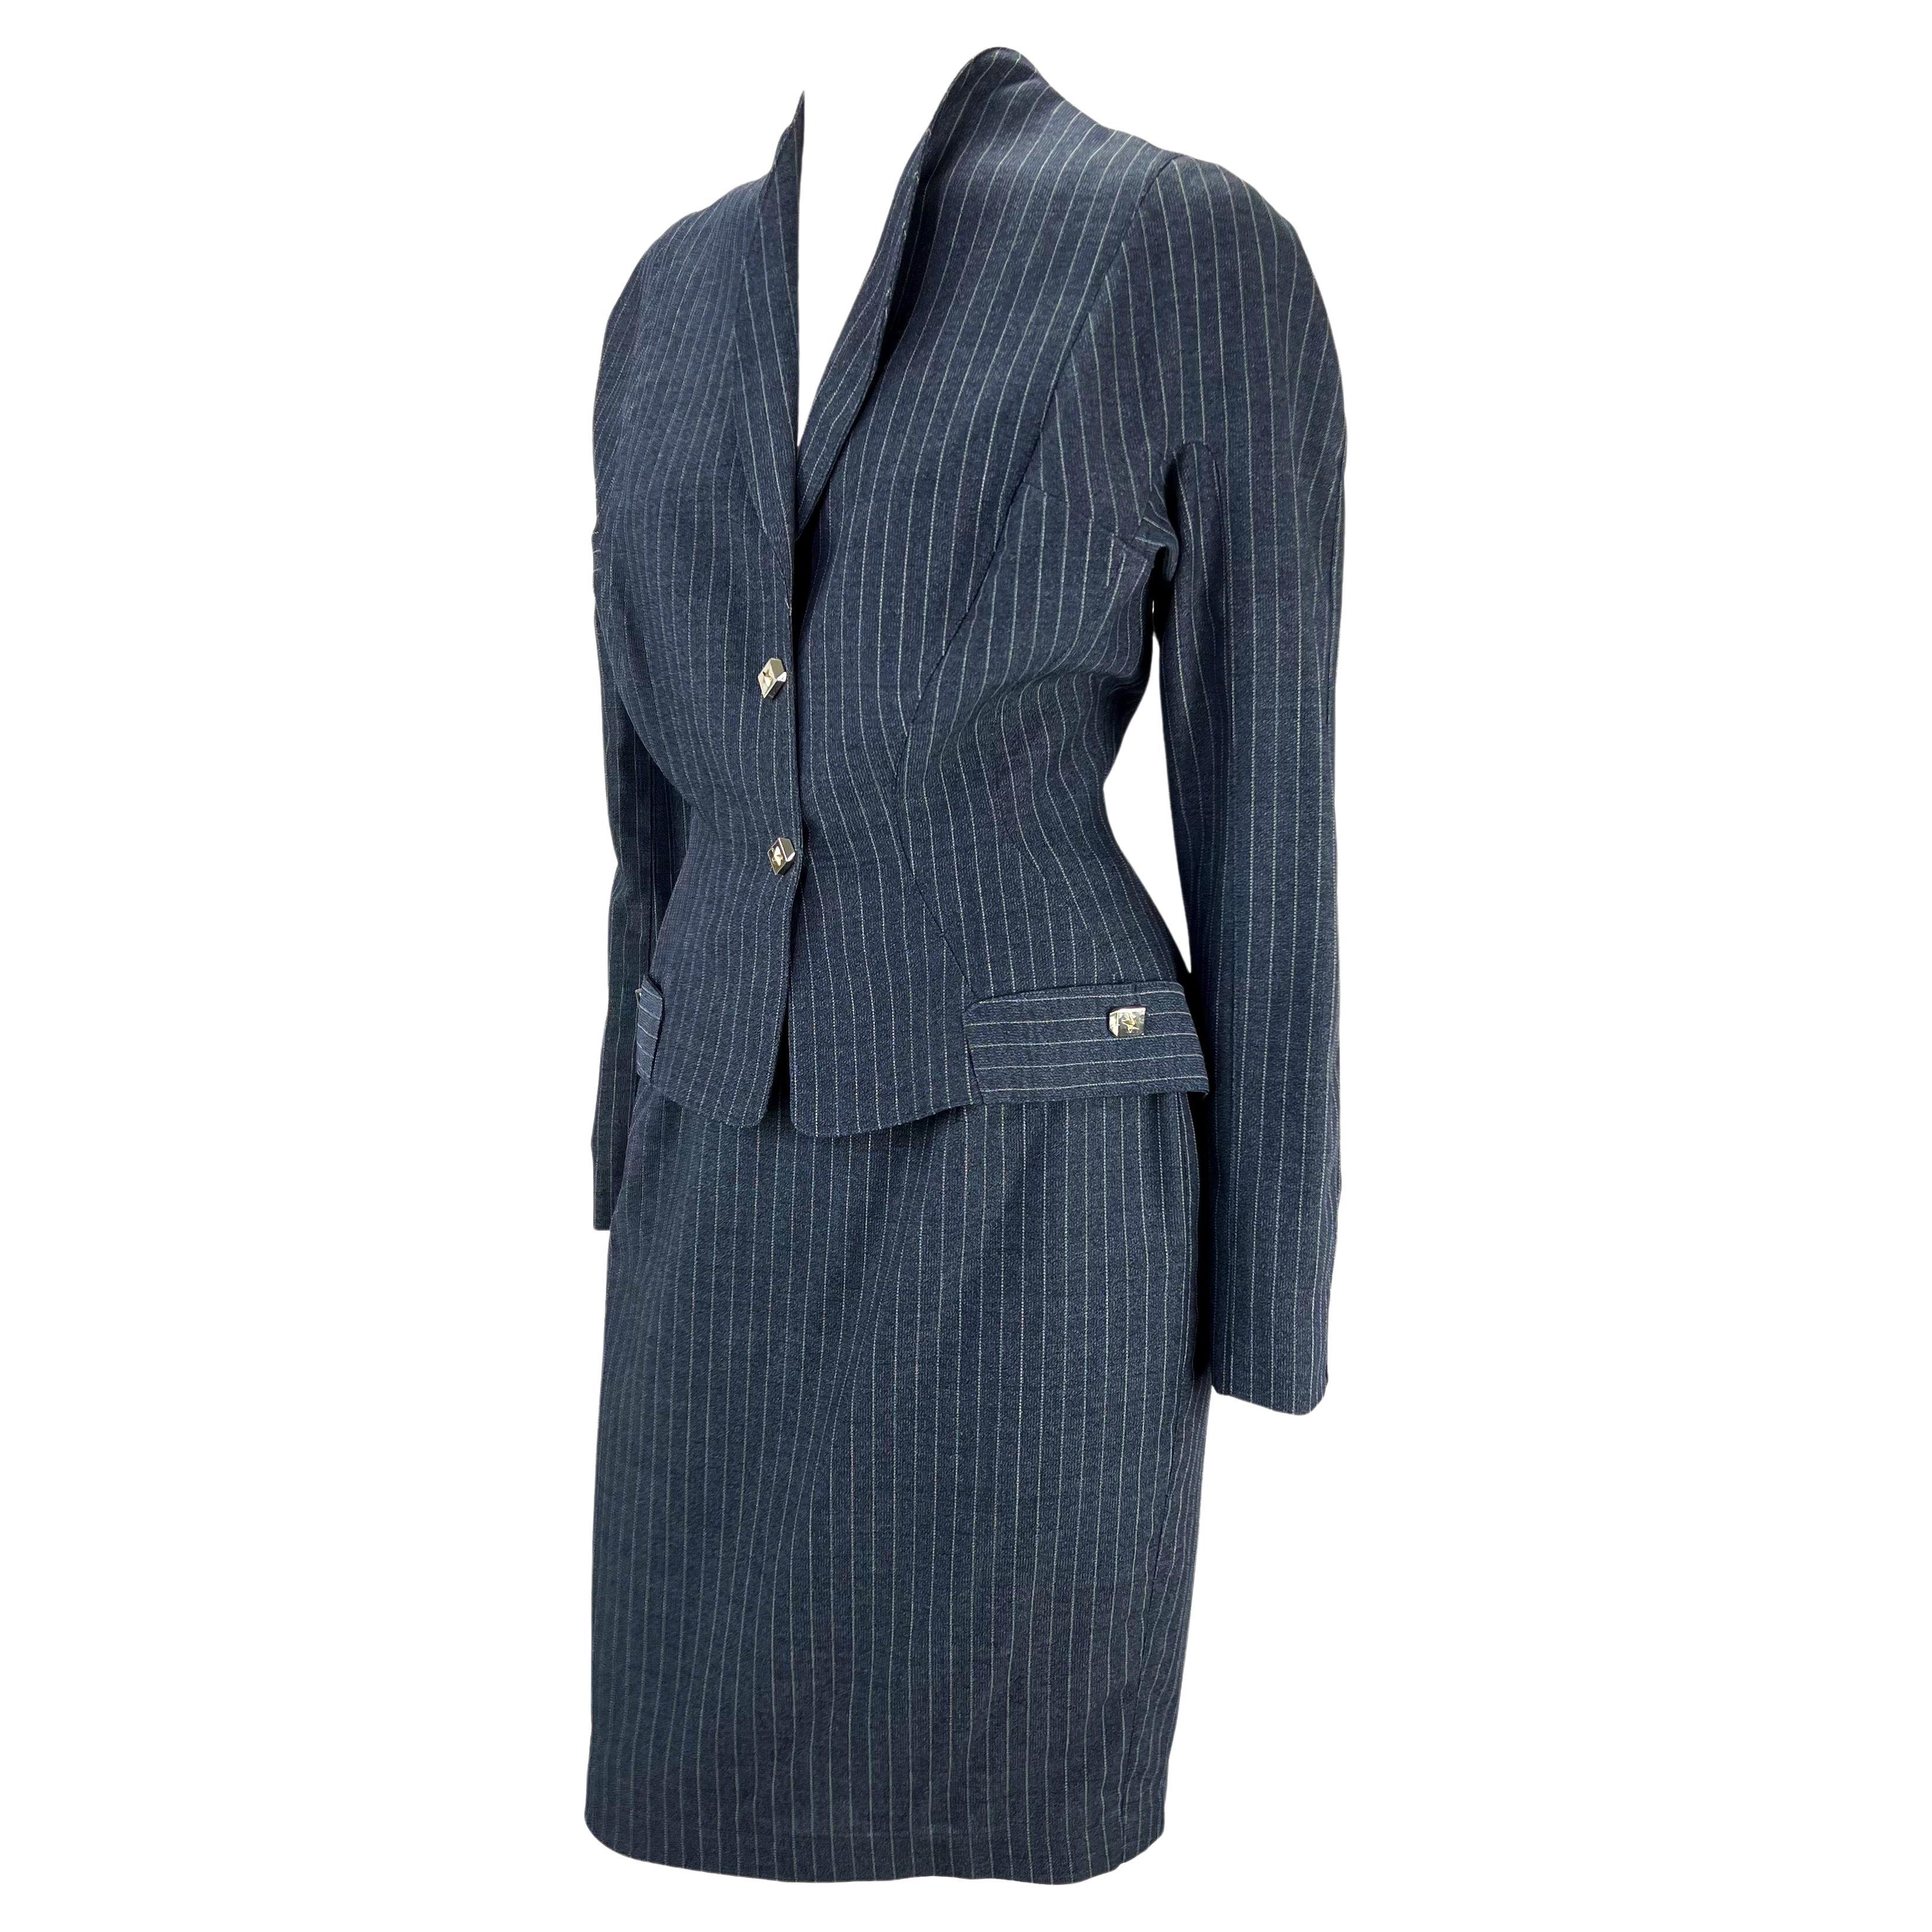 Presenting a sculptural pinstripe Thierry Mugler skirt suit, designed by Manfred Mugler. From the 1990s, this suit features masterful design and tailoring. The blazer features sculptural curved faux pockets which extenuate the hips. Both the skirt